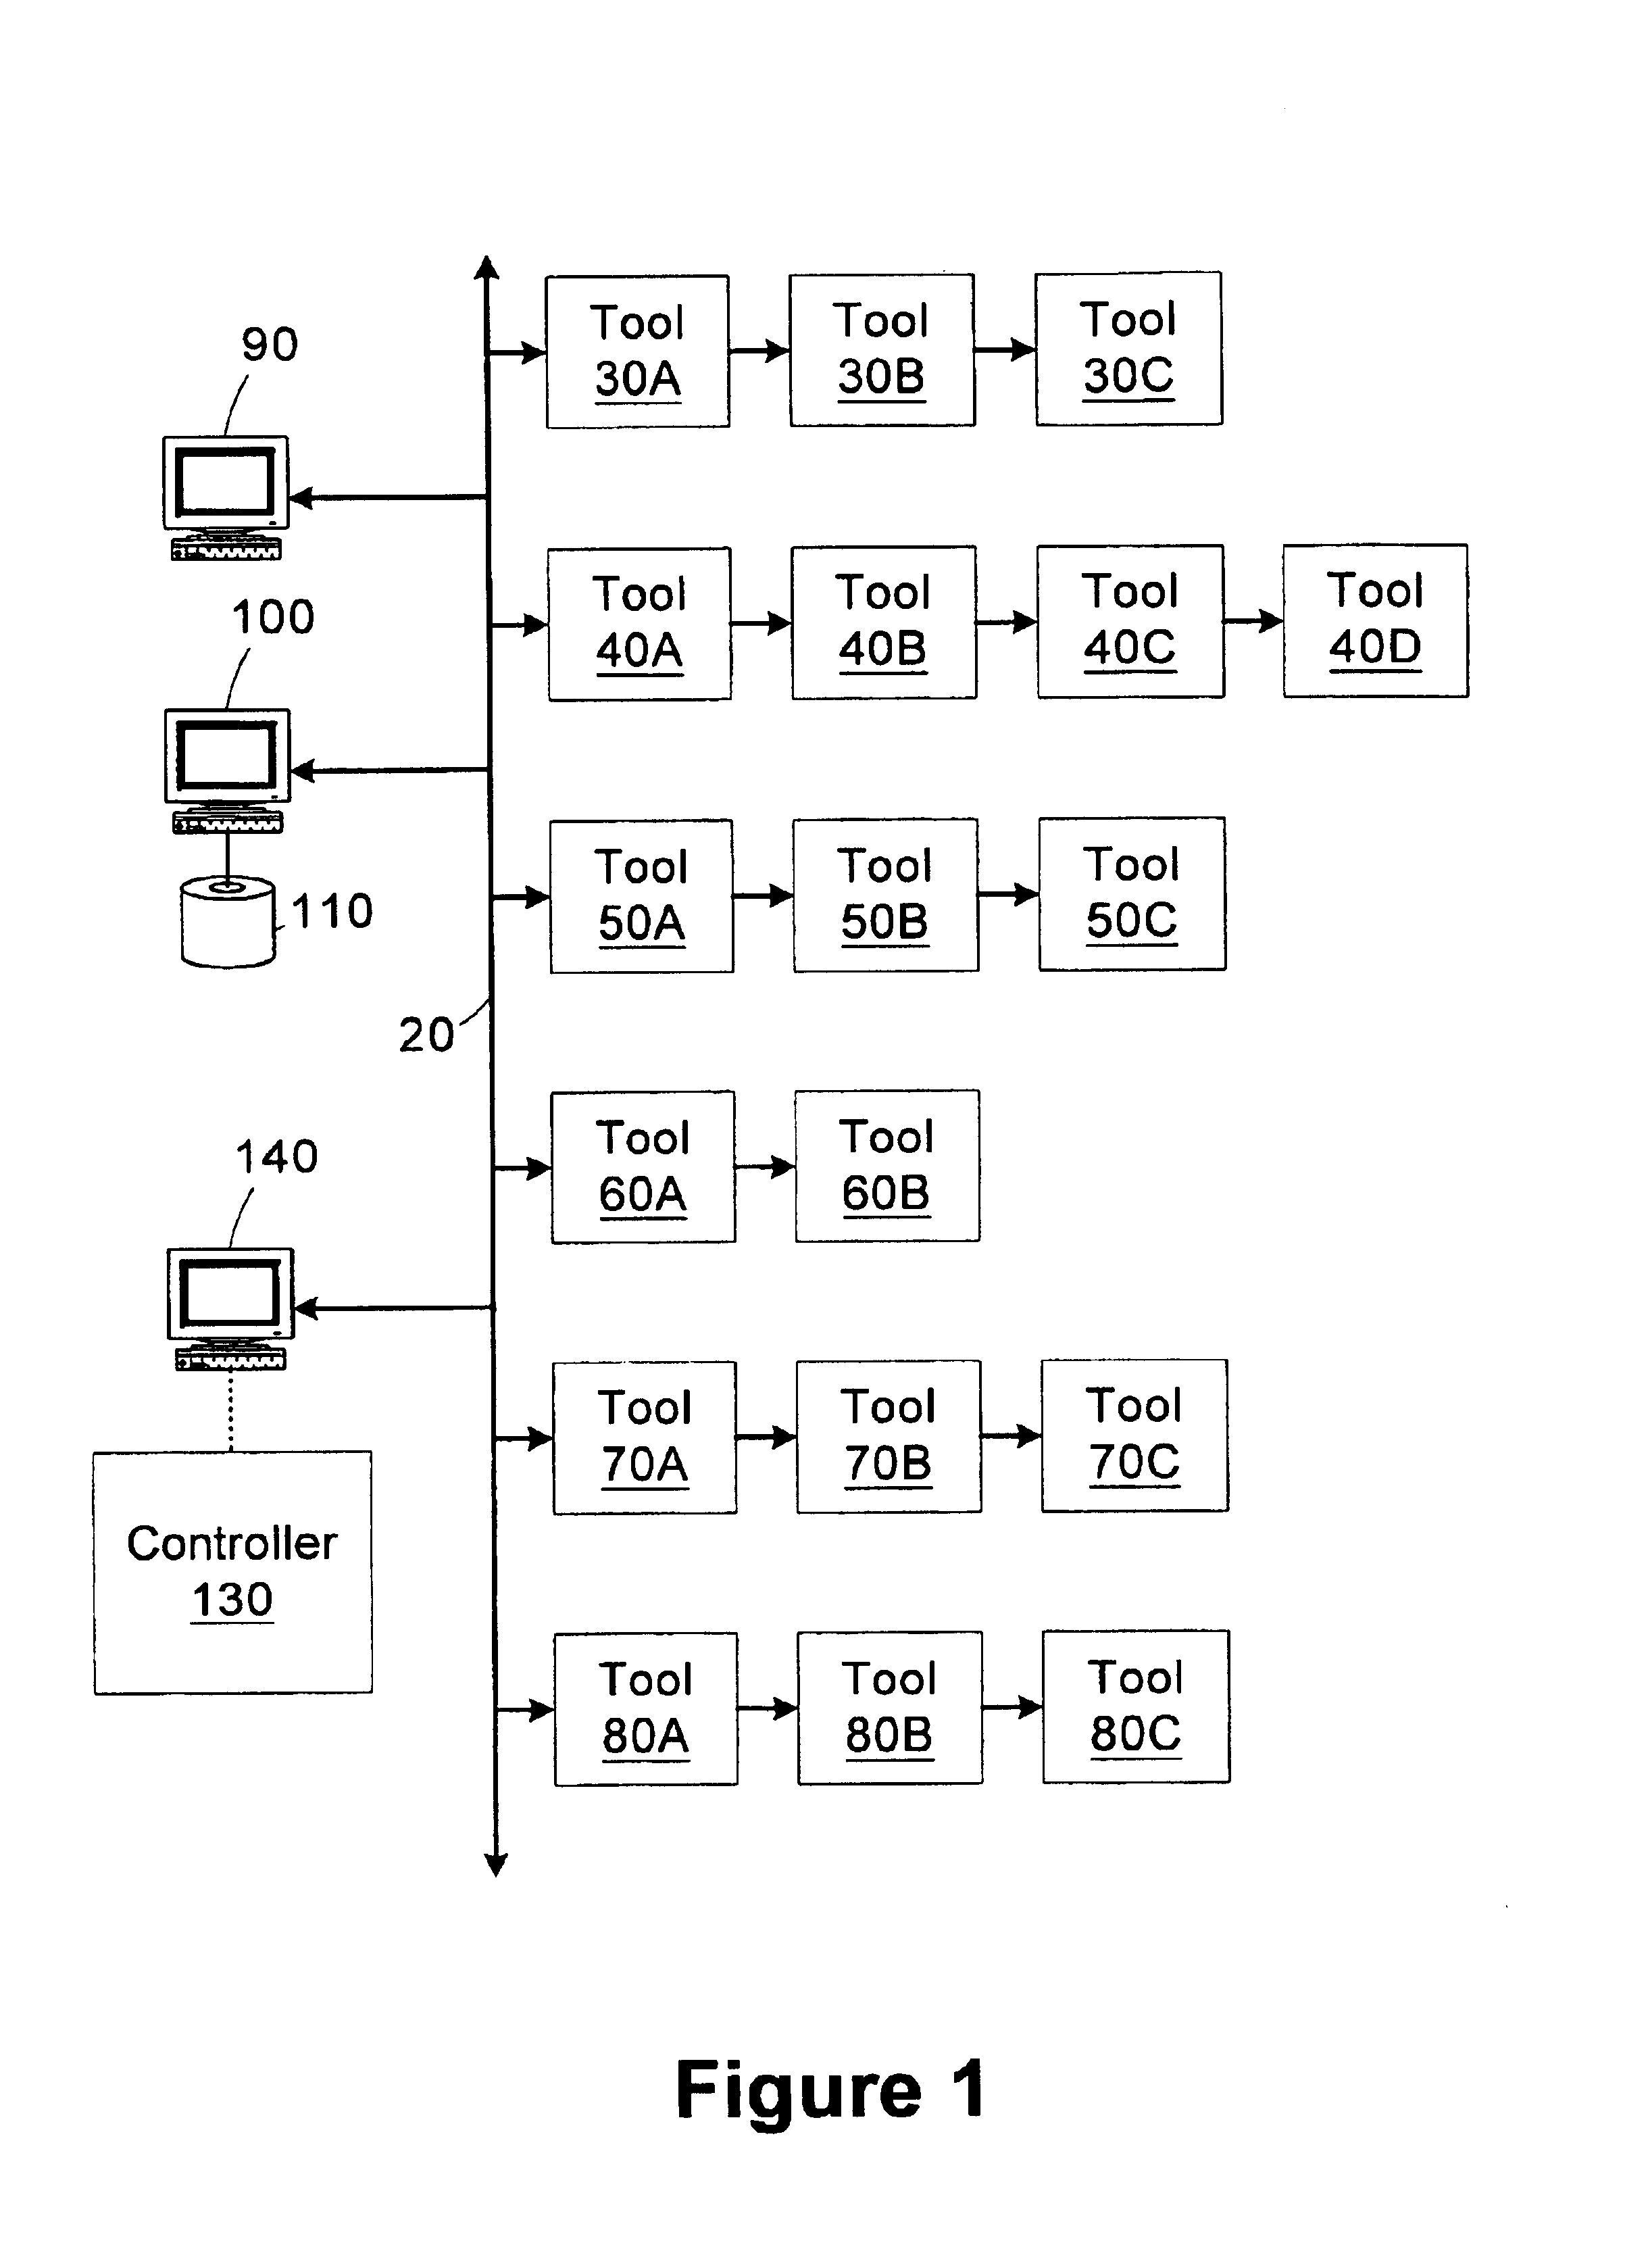 Method and apparatus for scheduling based on state estimation uncertainties